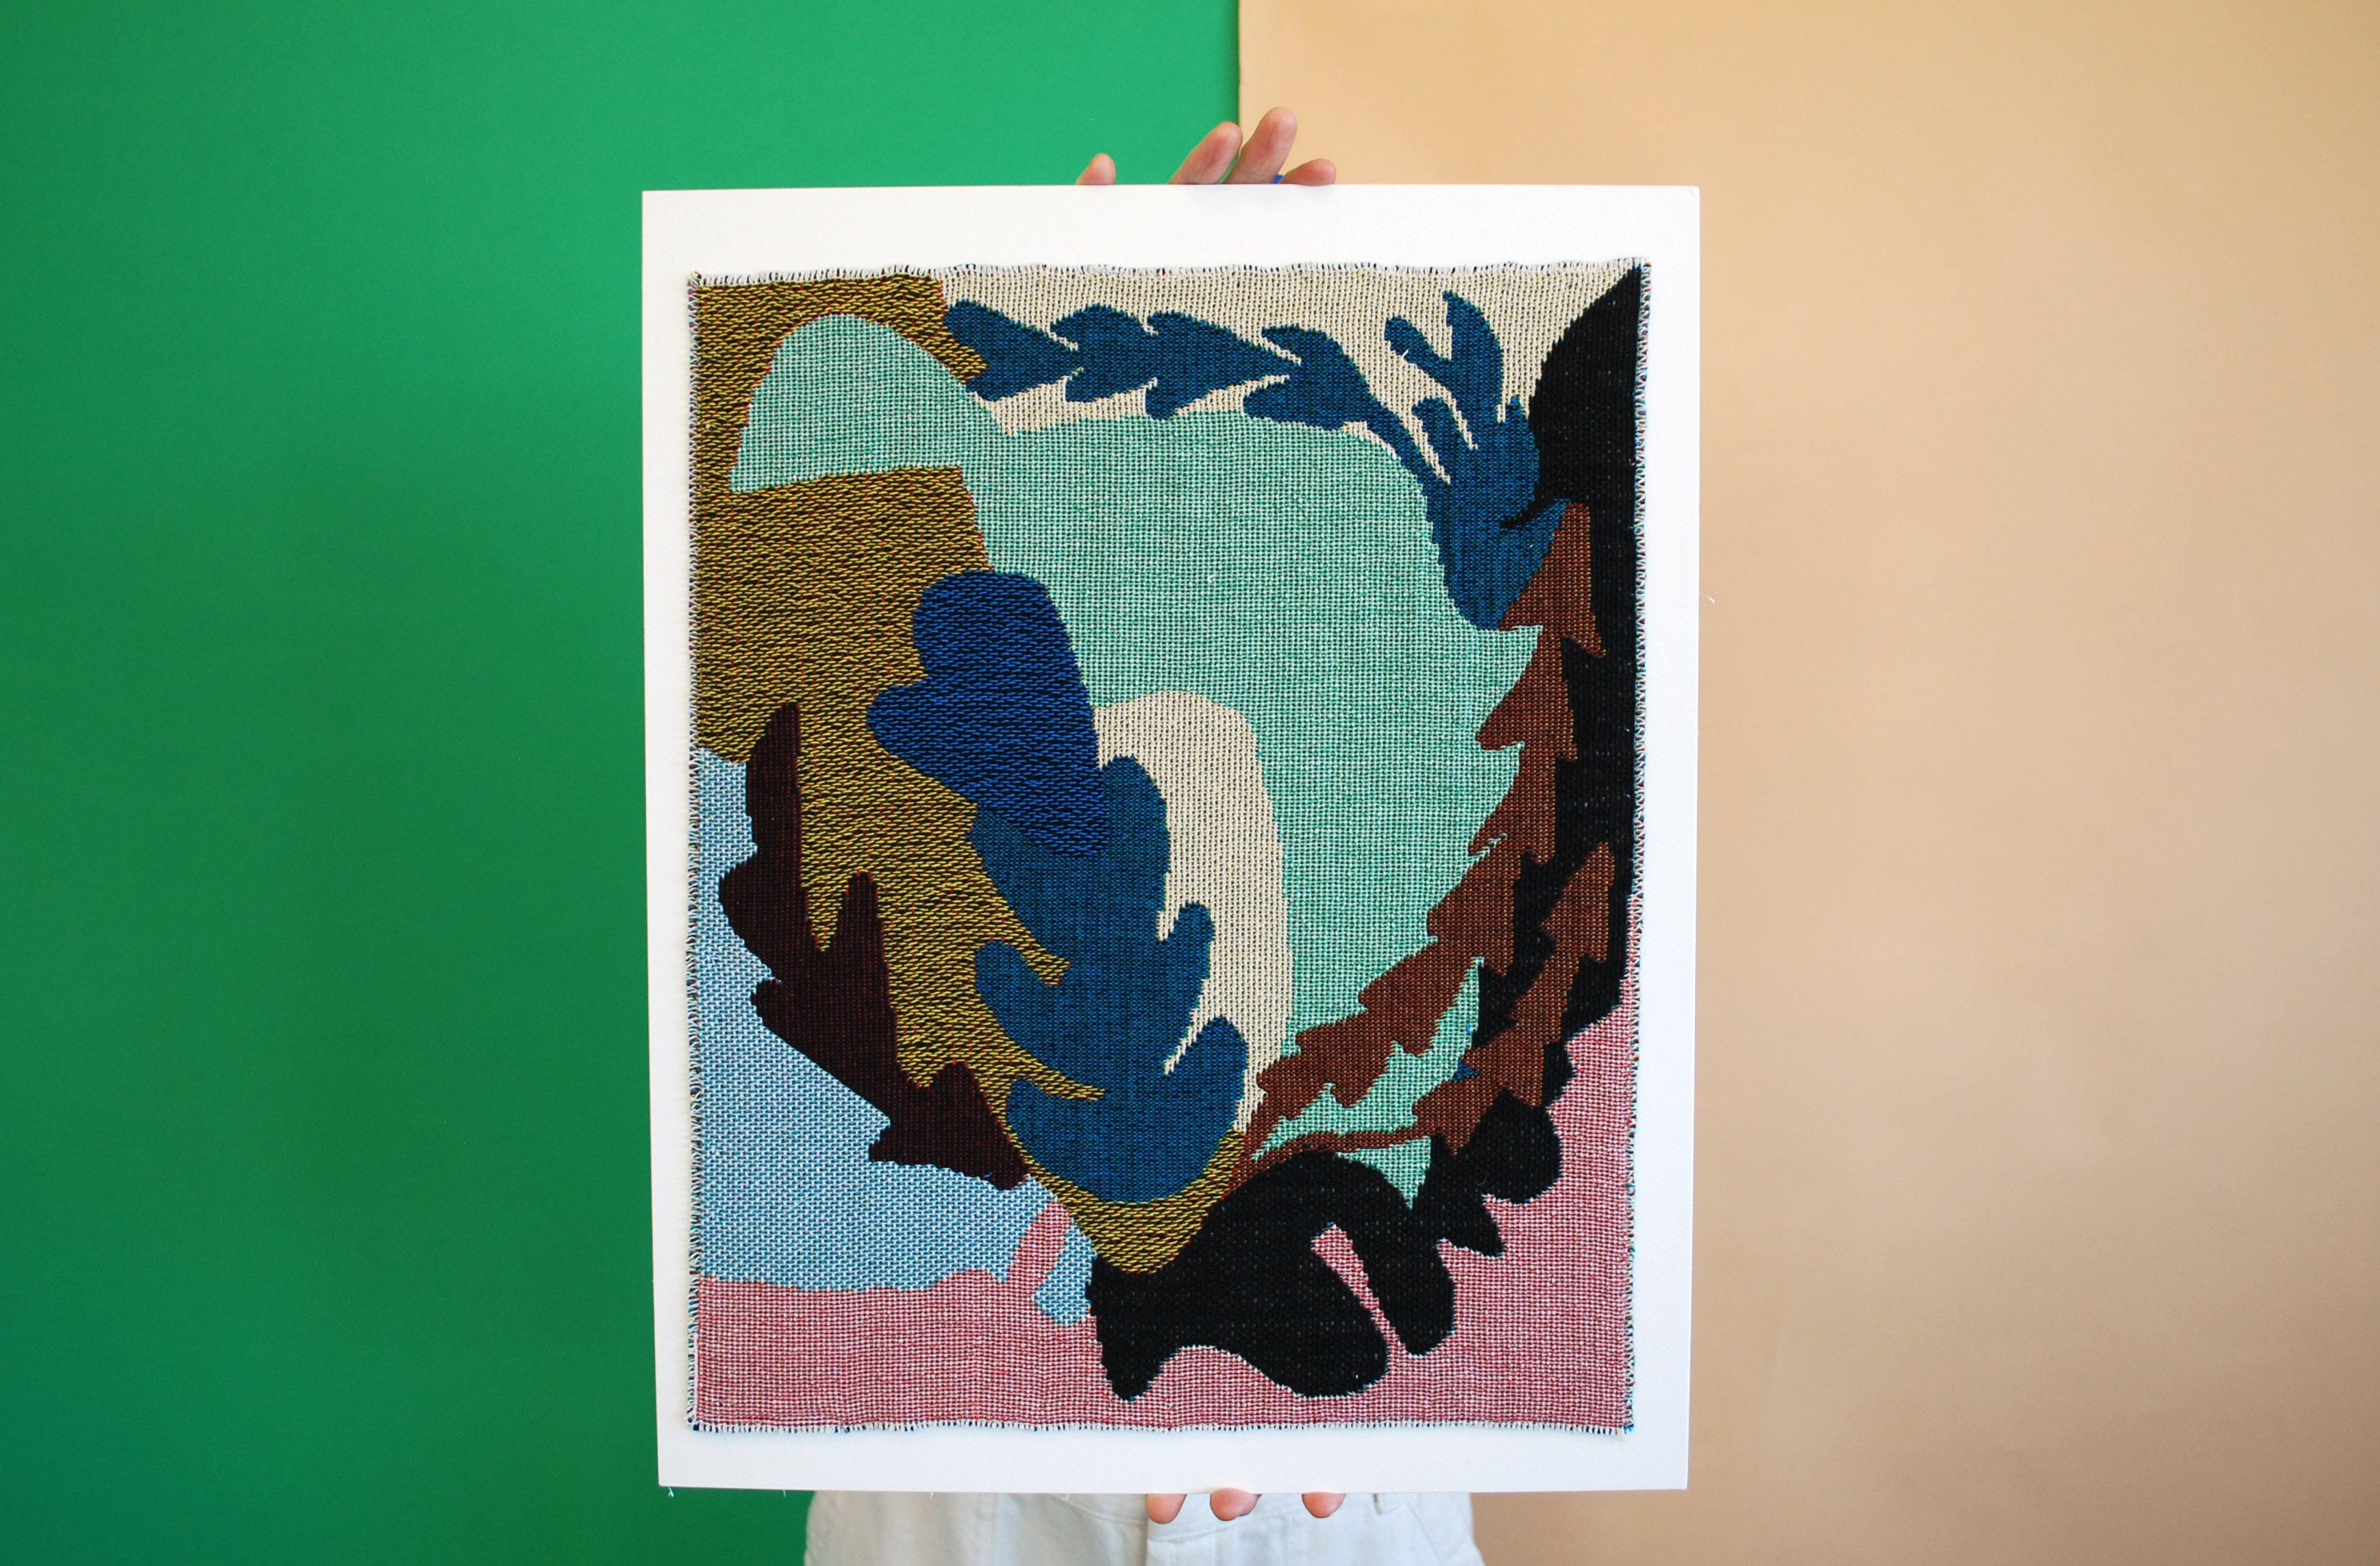 Leaf Study No.3 was inspired by the landscape in Chicago, Illinois, derived from a series of abstract plein air drawings done in the area during Covid 2020.

This tapestry is a Limited Edition of 8 total. 

Jacquard Woven with cotton. Each is signed